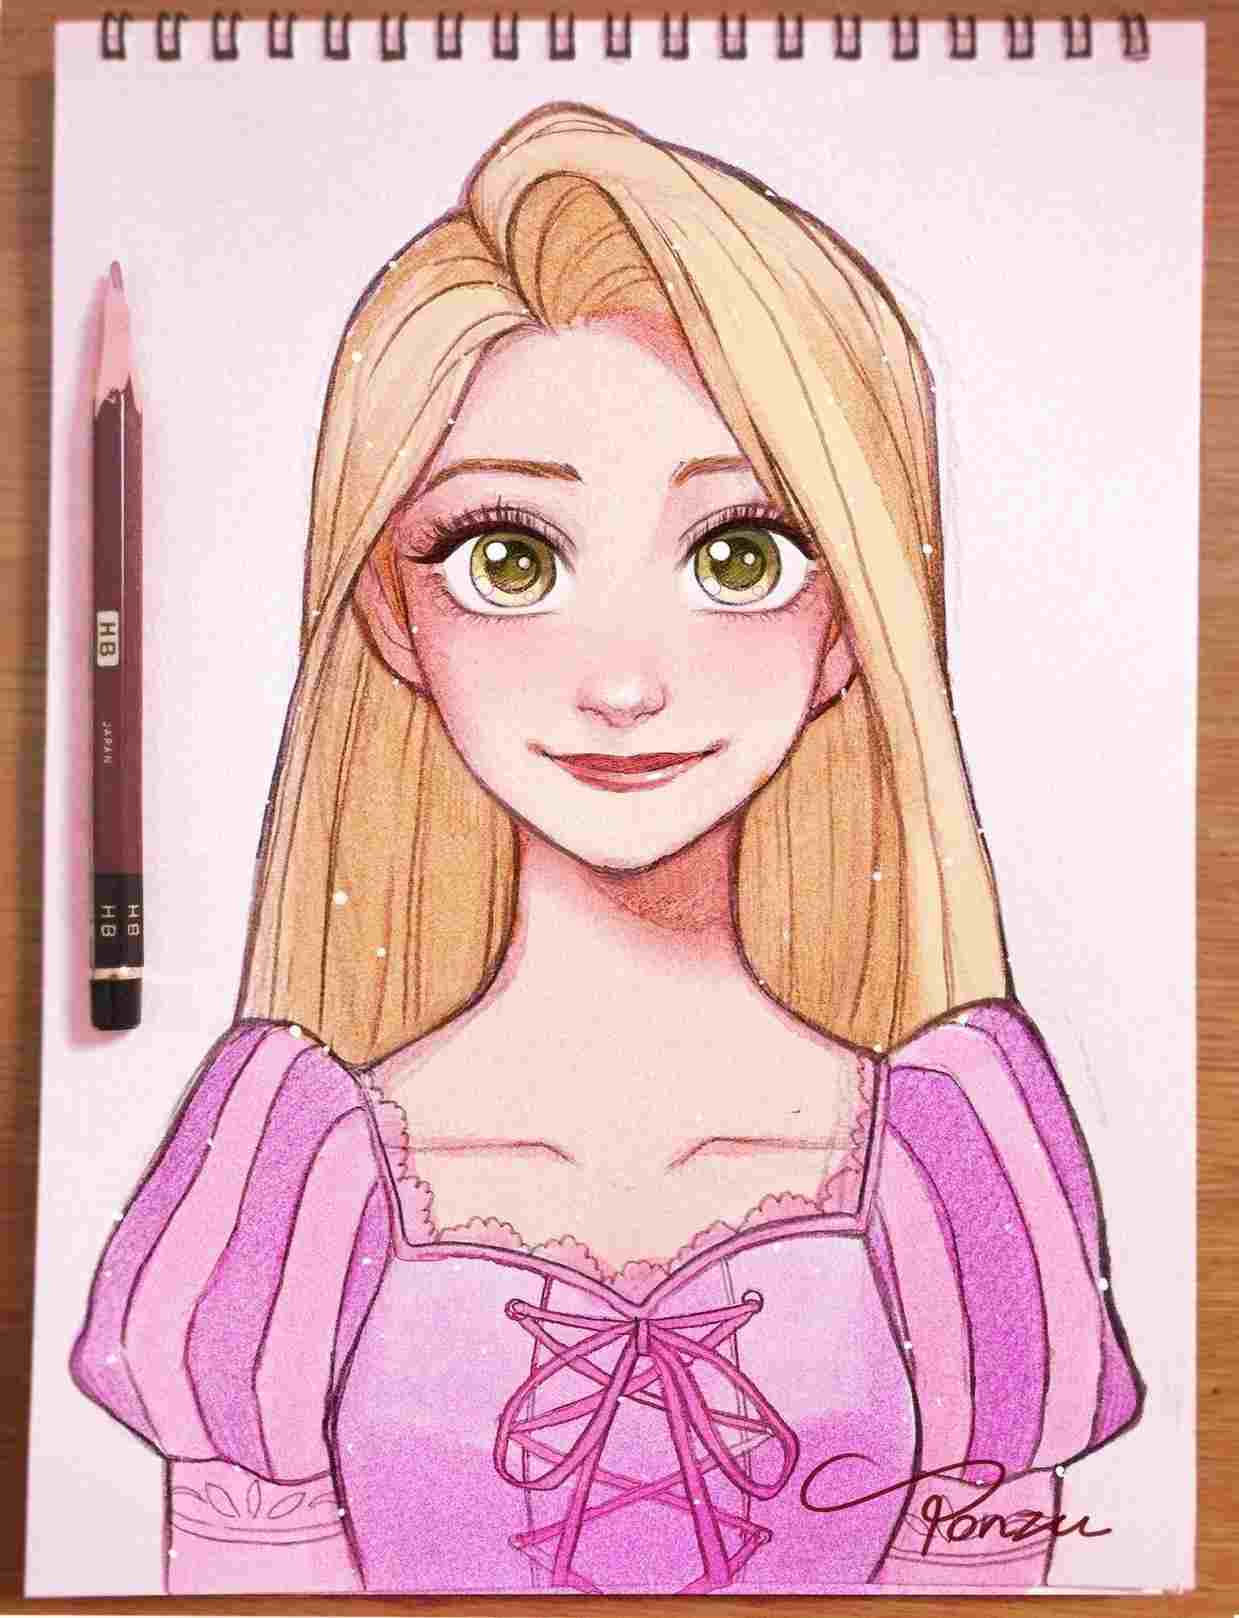 Creative Disney Prencesses Sketches To Draw with Pencil